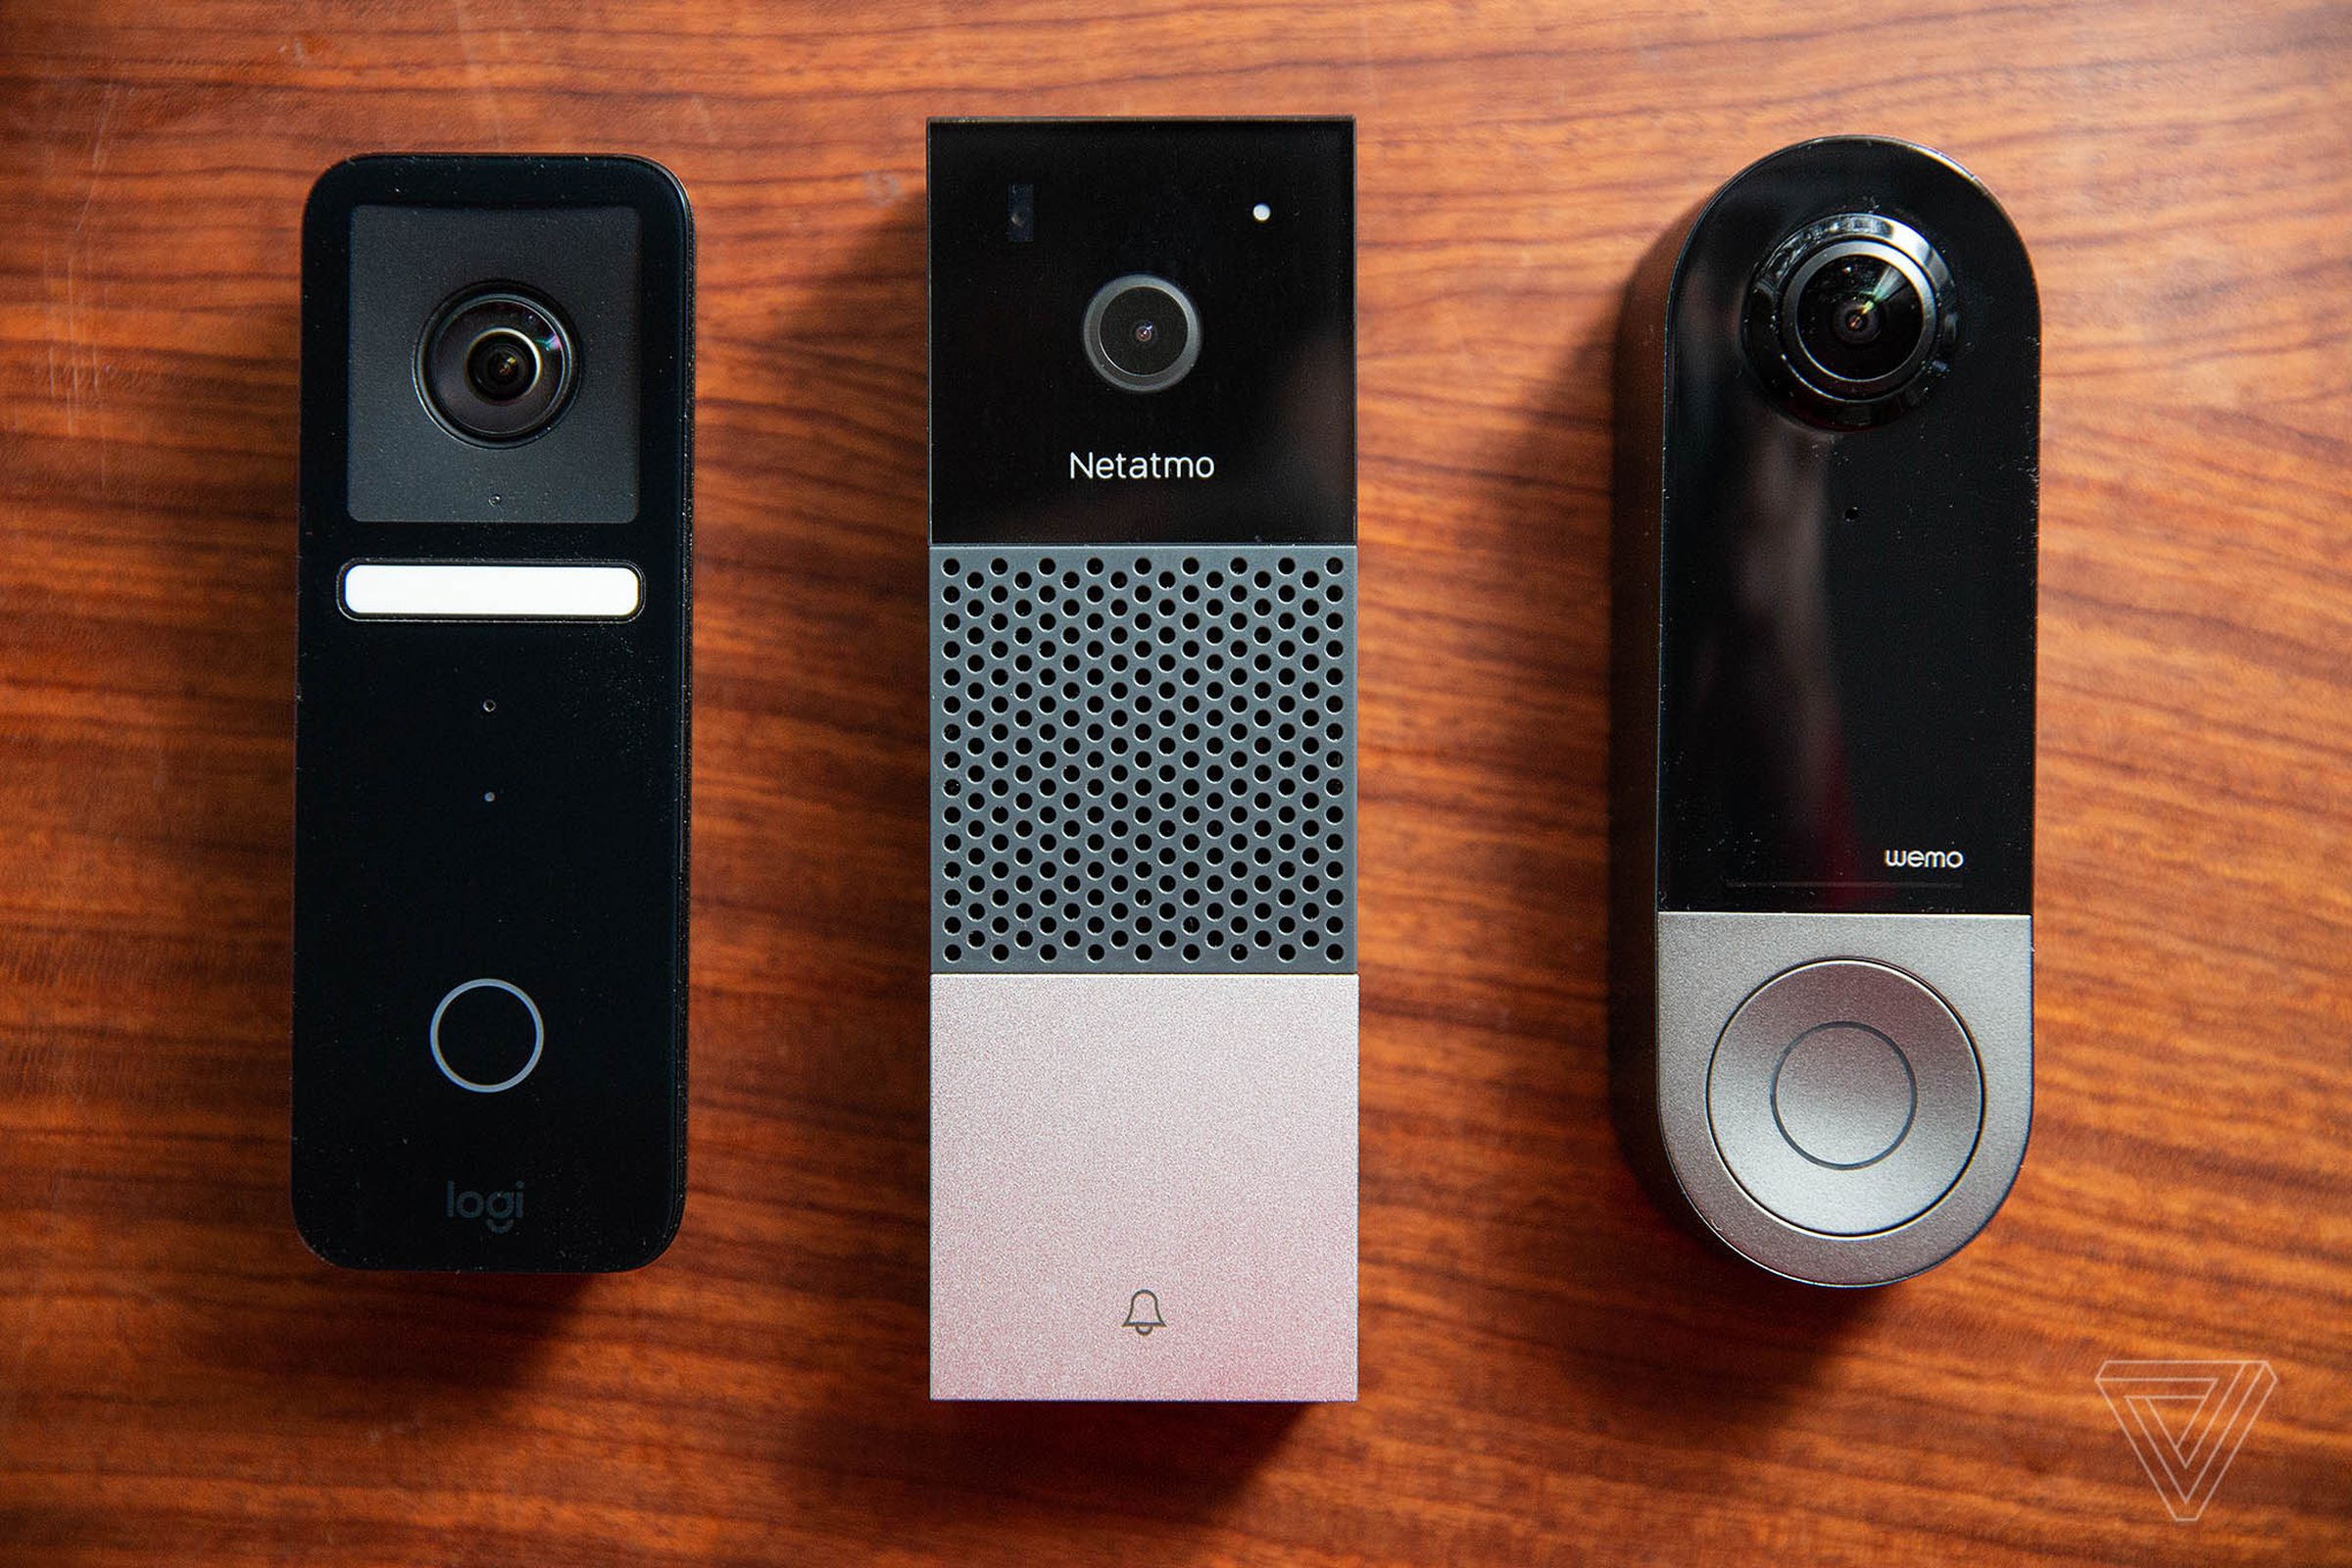 There are a variety of video doorbell designs, but shades of gray and black are most common.